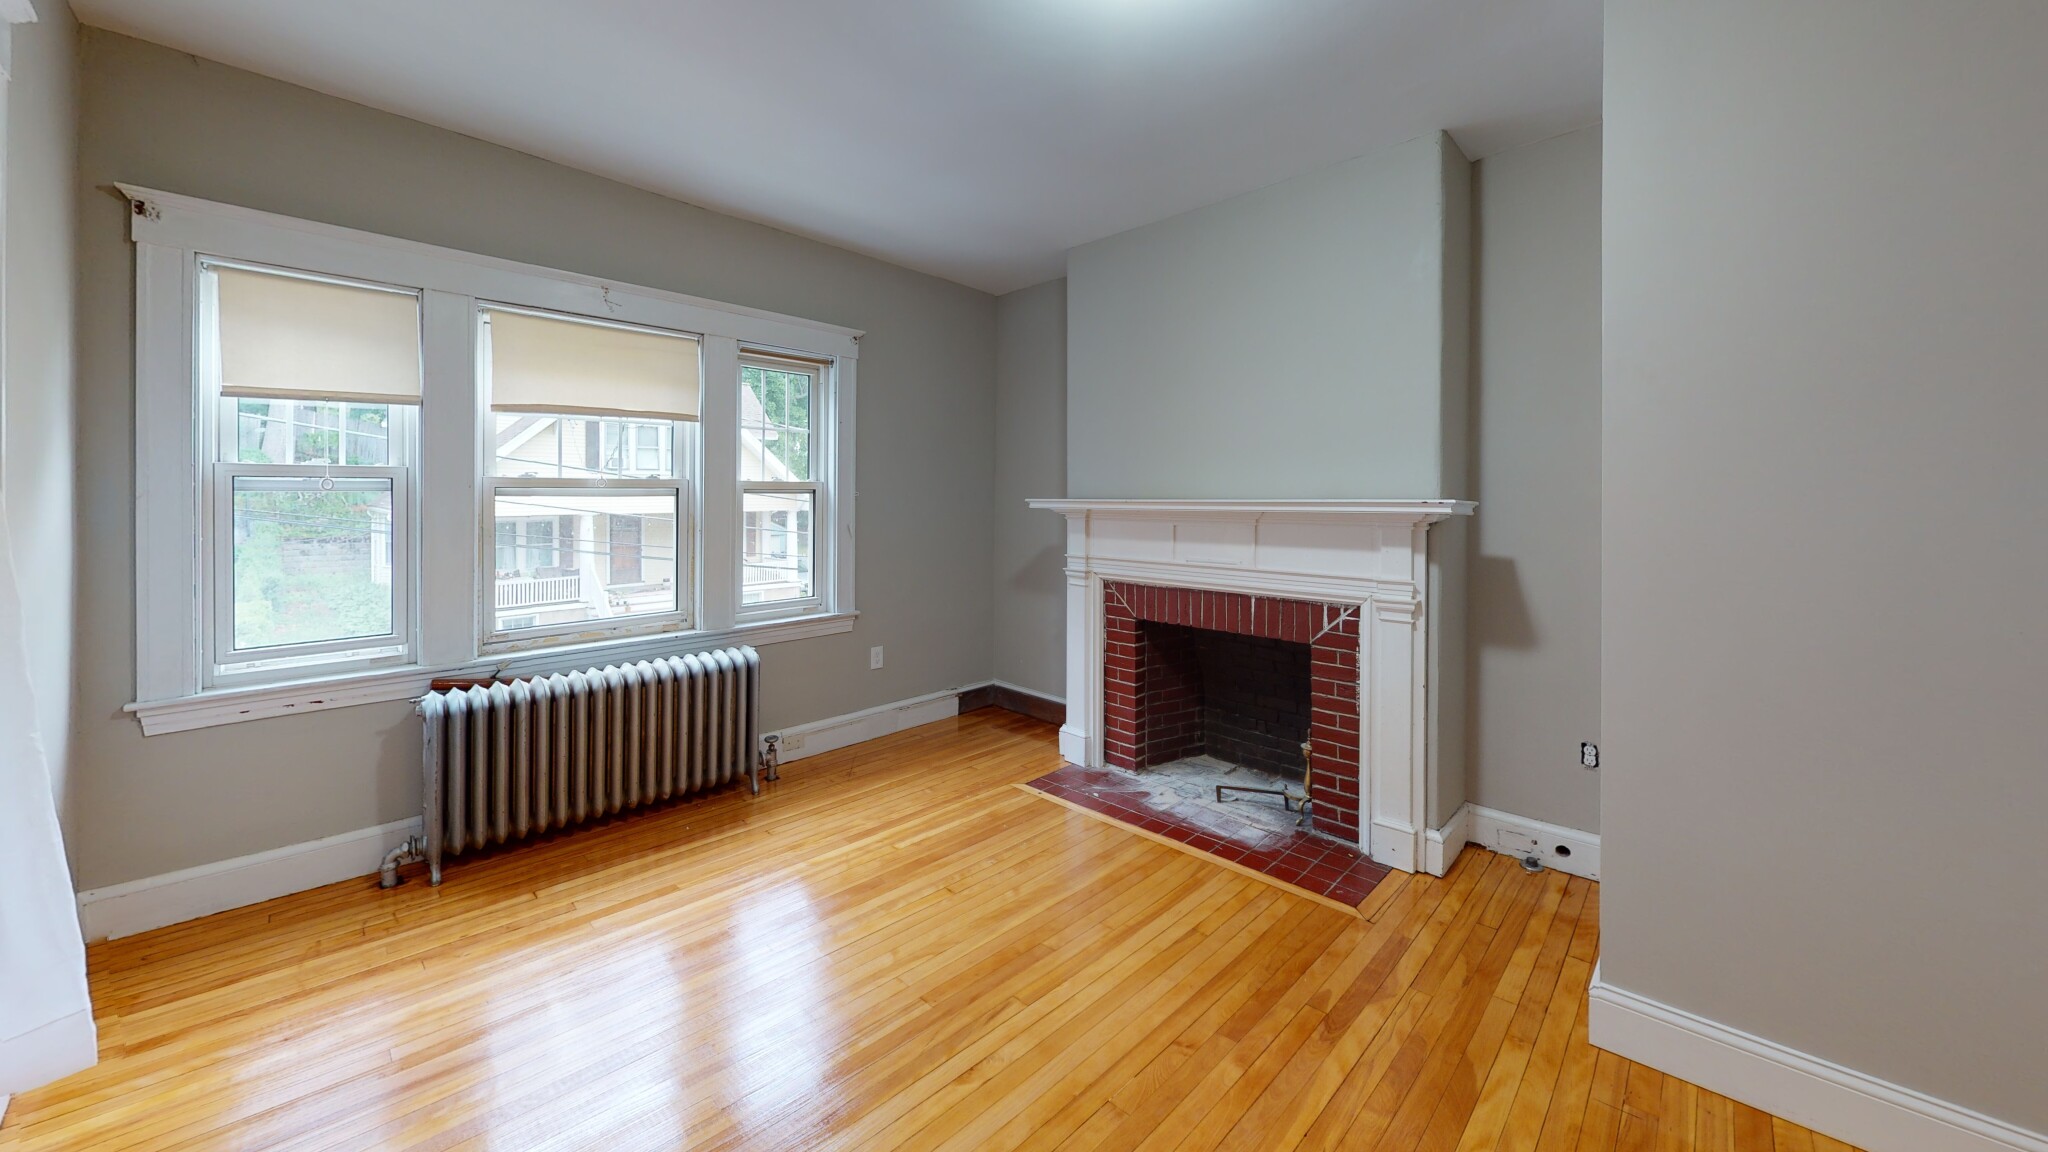 Photos of apartment on Upcrest Rd.,Boston MA 02135